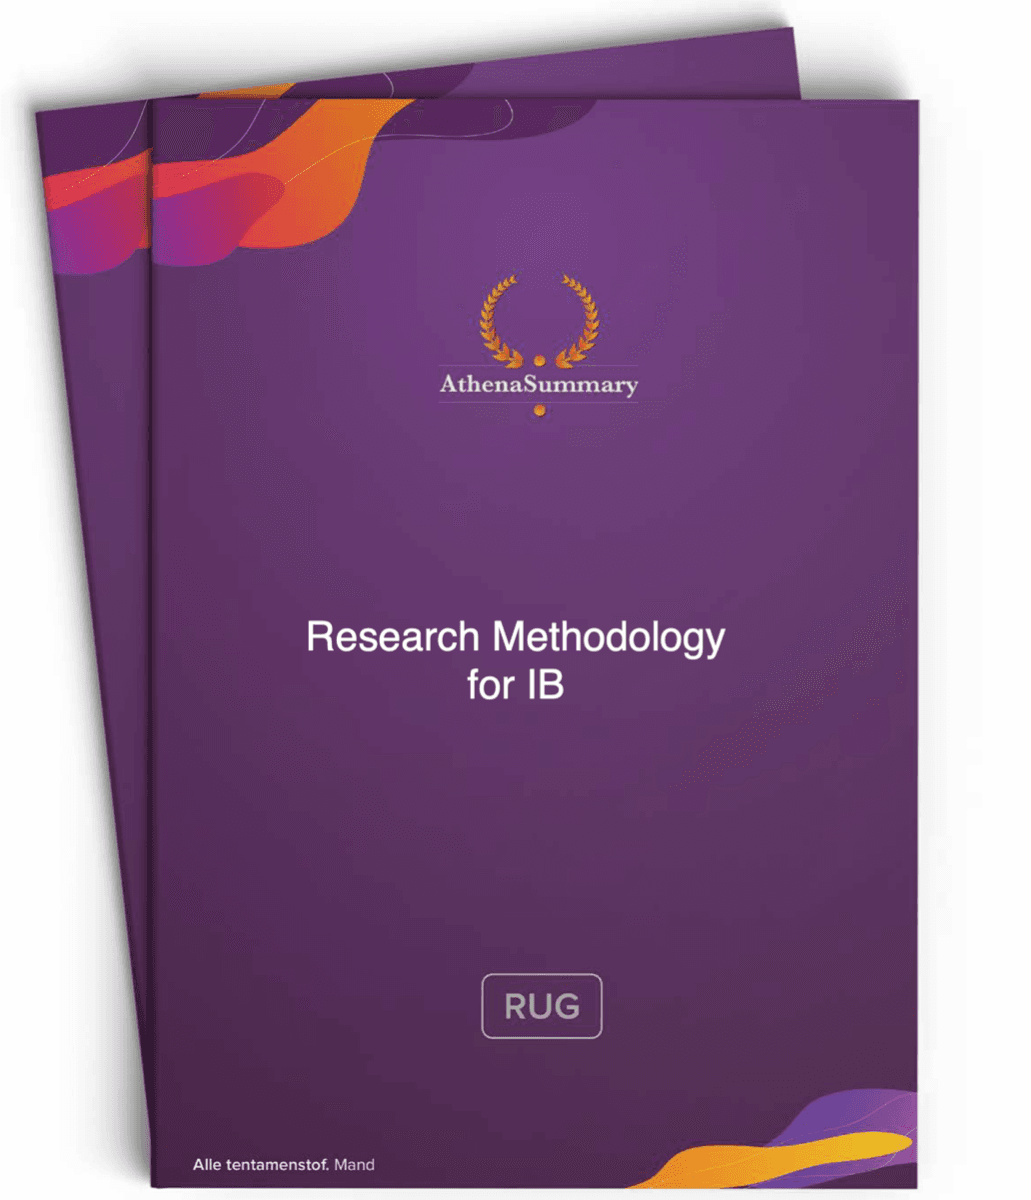 Literature Summary - Research Methodology for IB